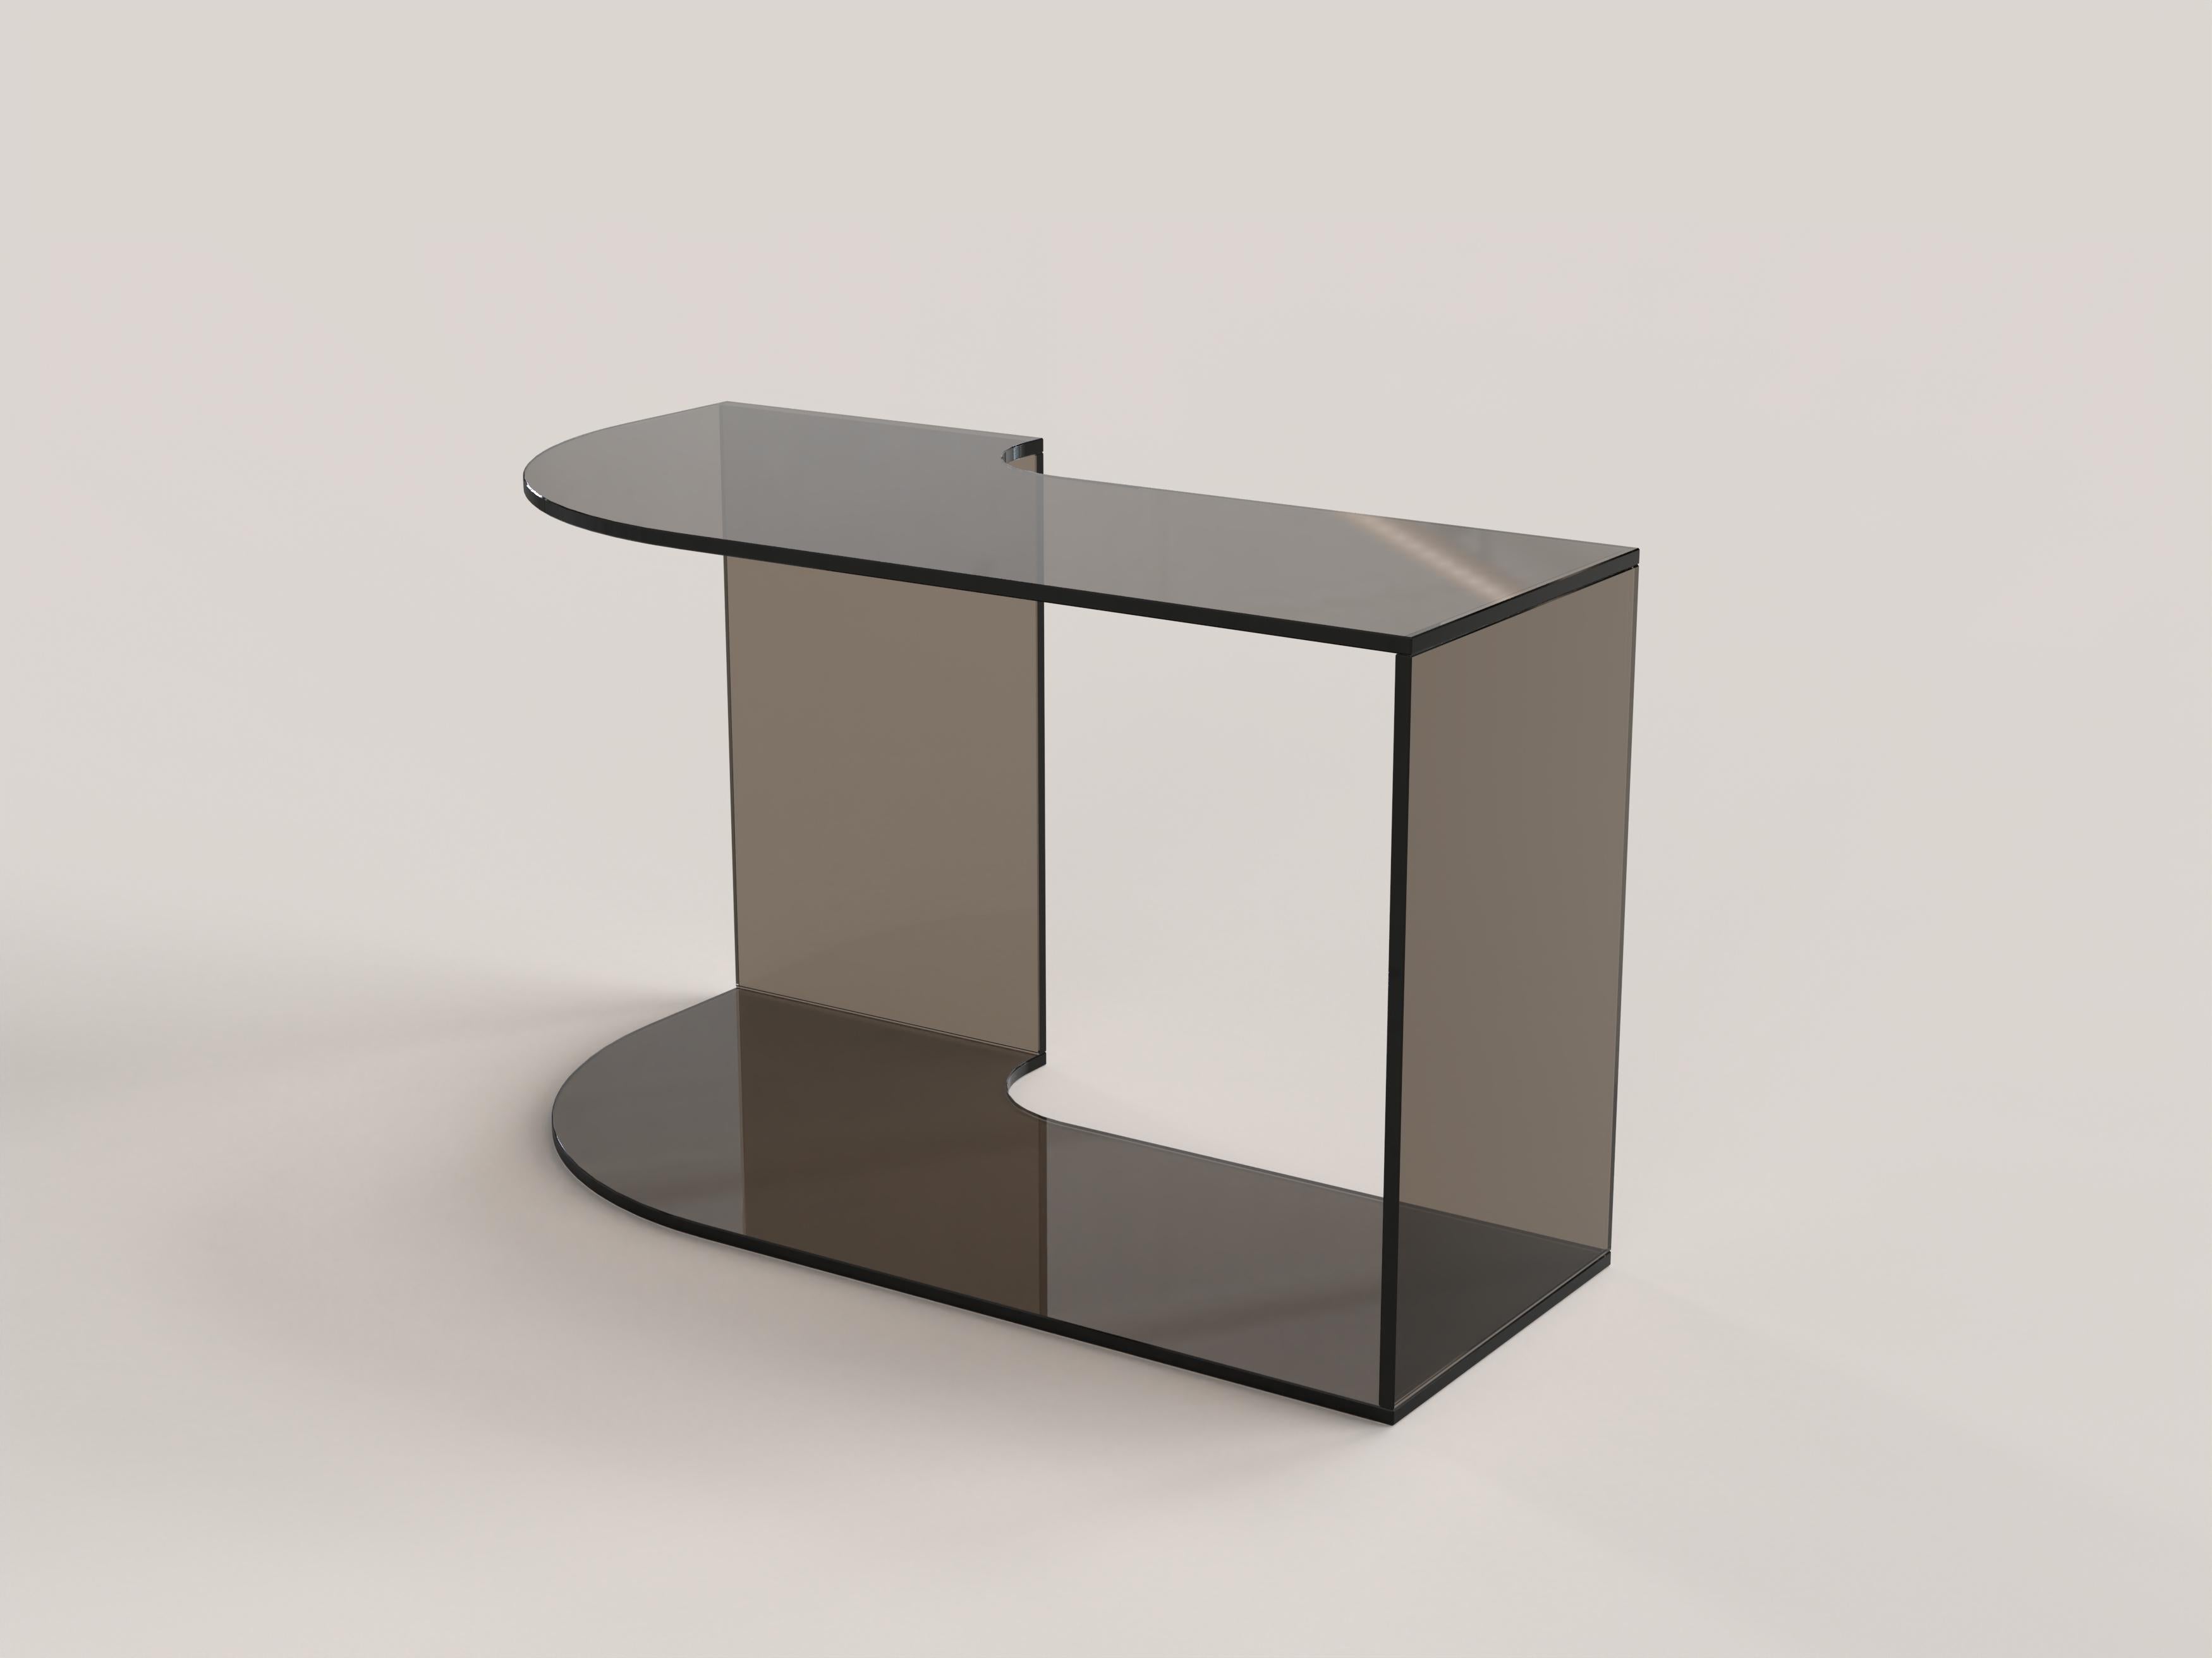 Quarter V2 is a 21st Century bronze side table made by Italian artisans in bronzed  glass. The piece is manufactured in a limited edition of 1000 signed and progressively numbered examples. It is part of the collectible design language Quarter that